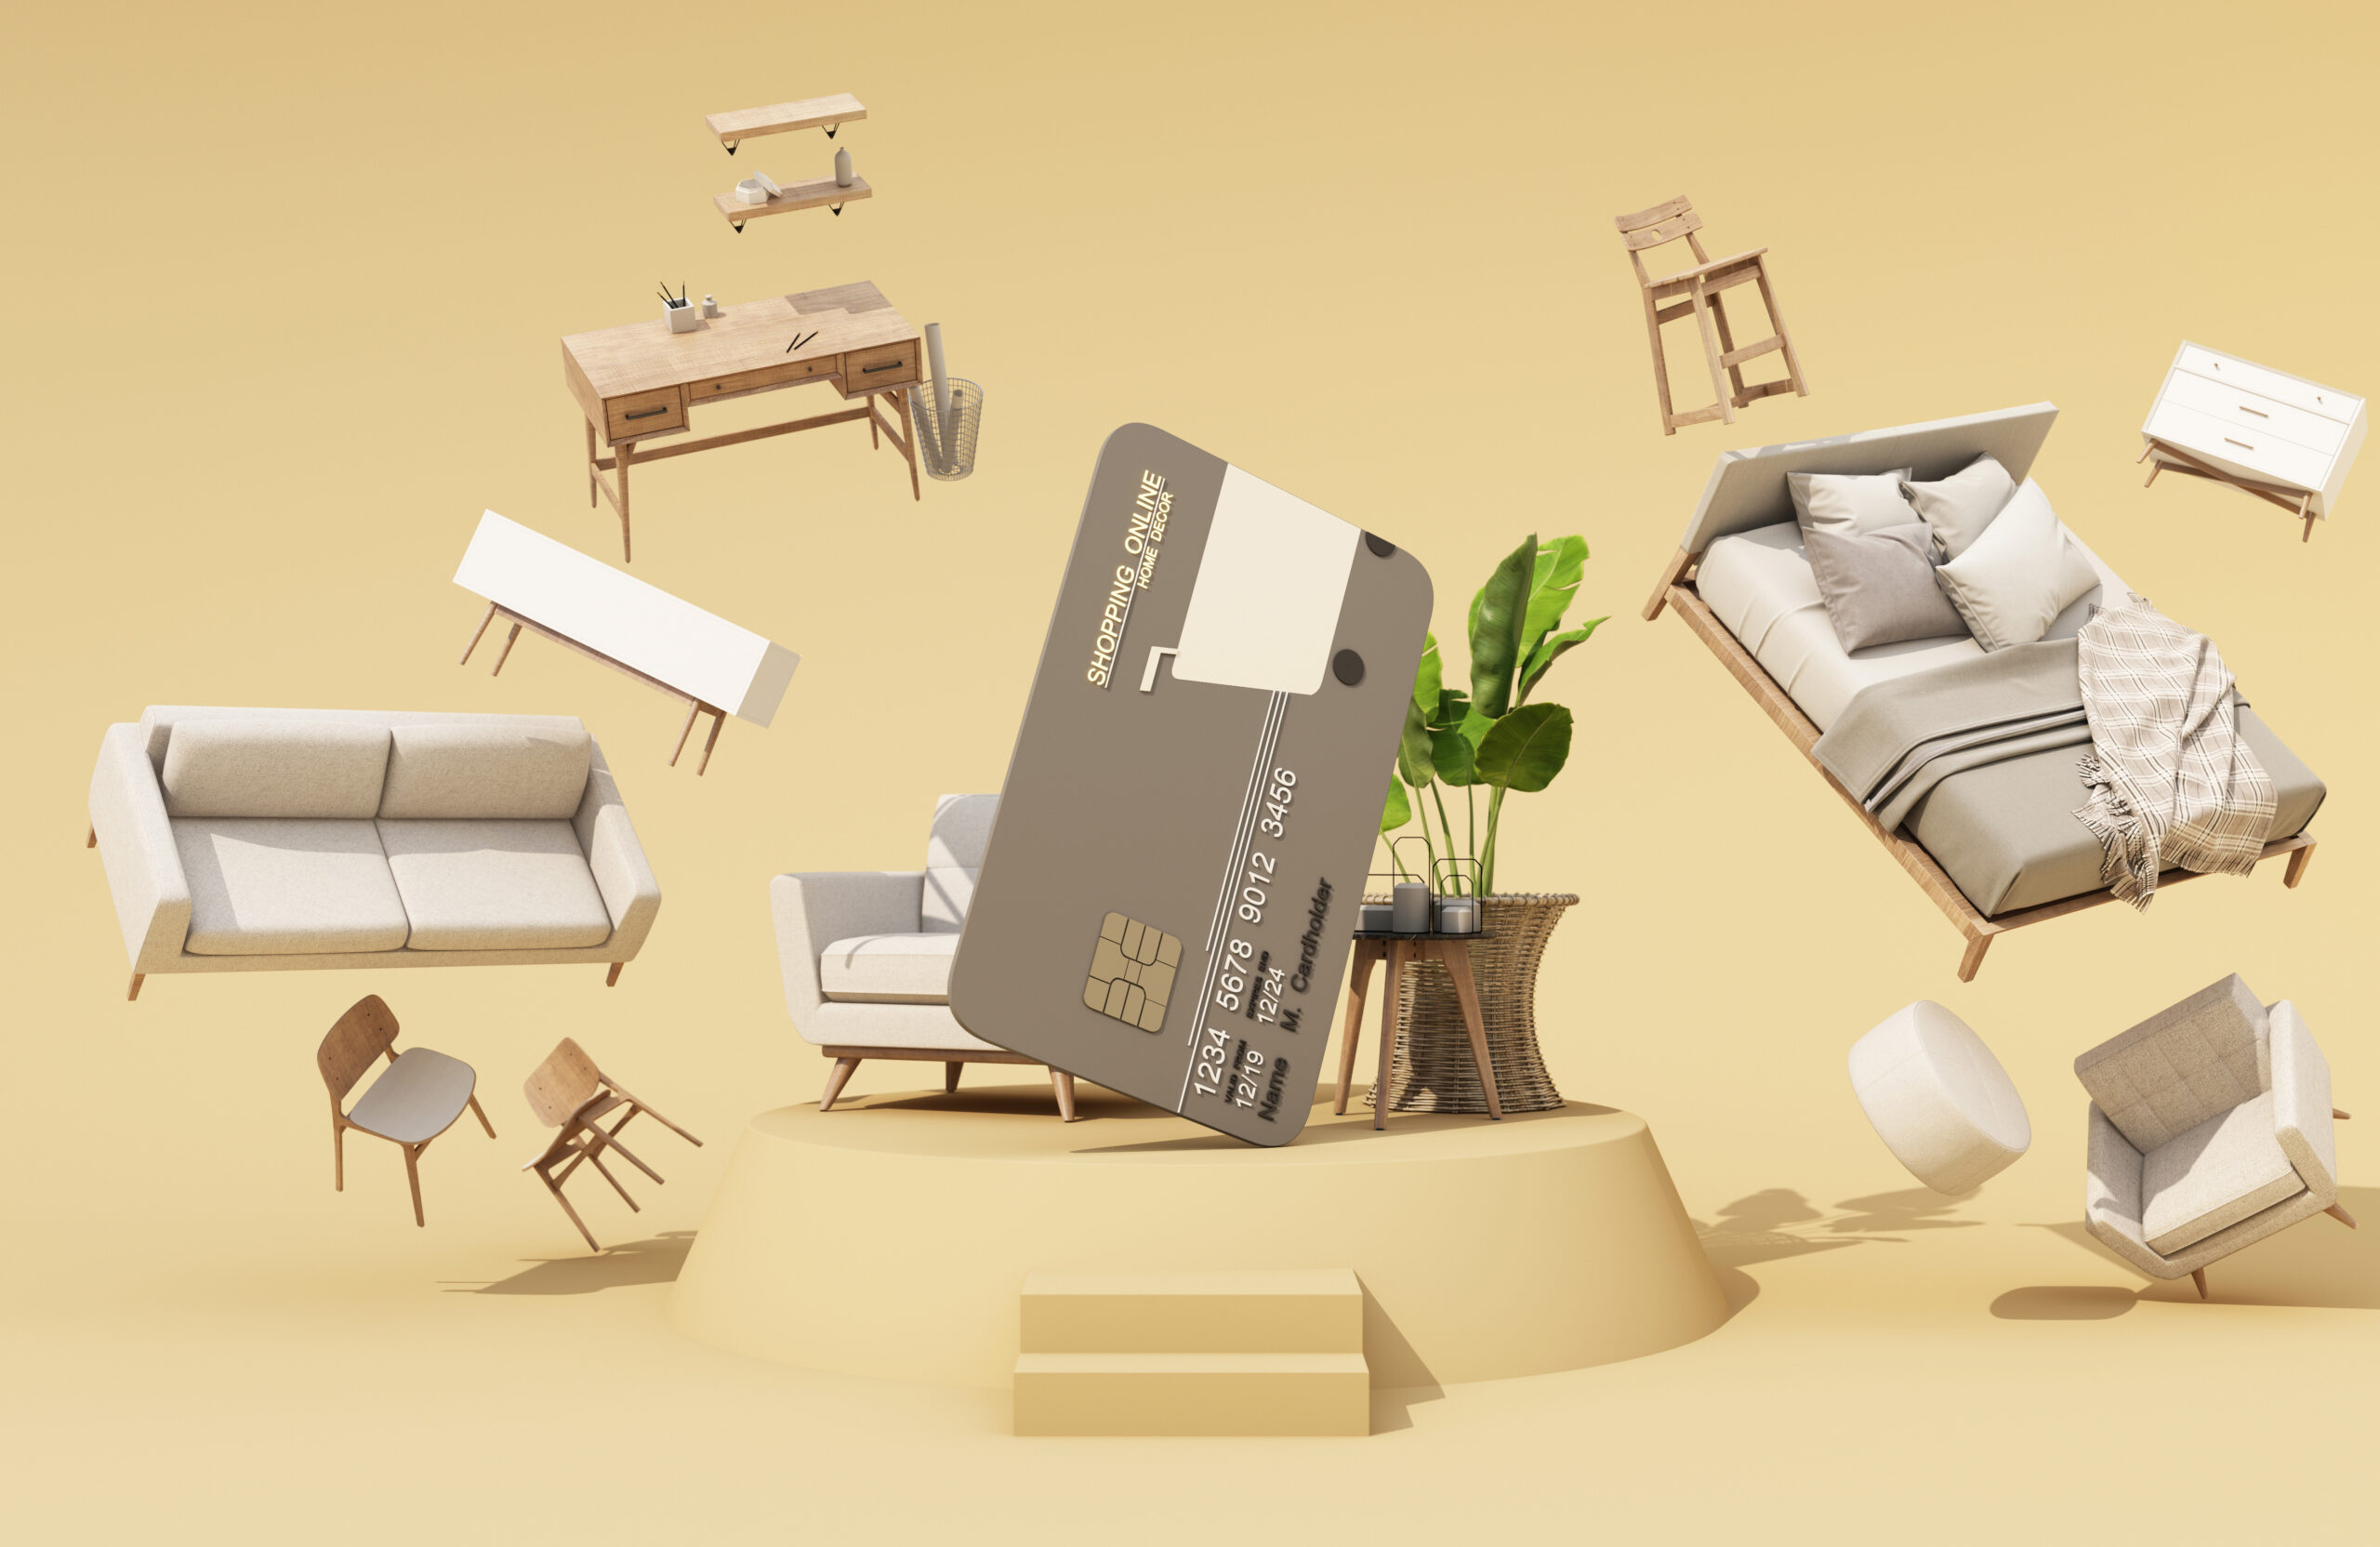 Credit card with furniture pieces, buying habits for home goods consumers